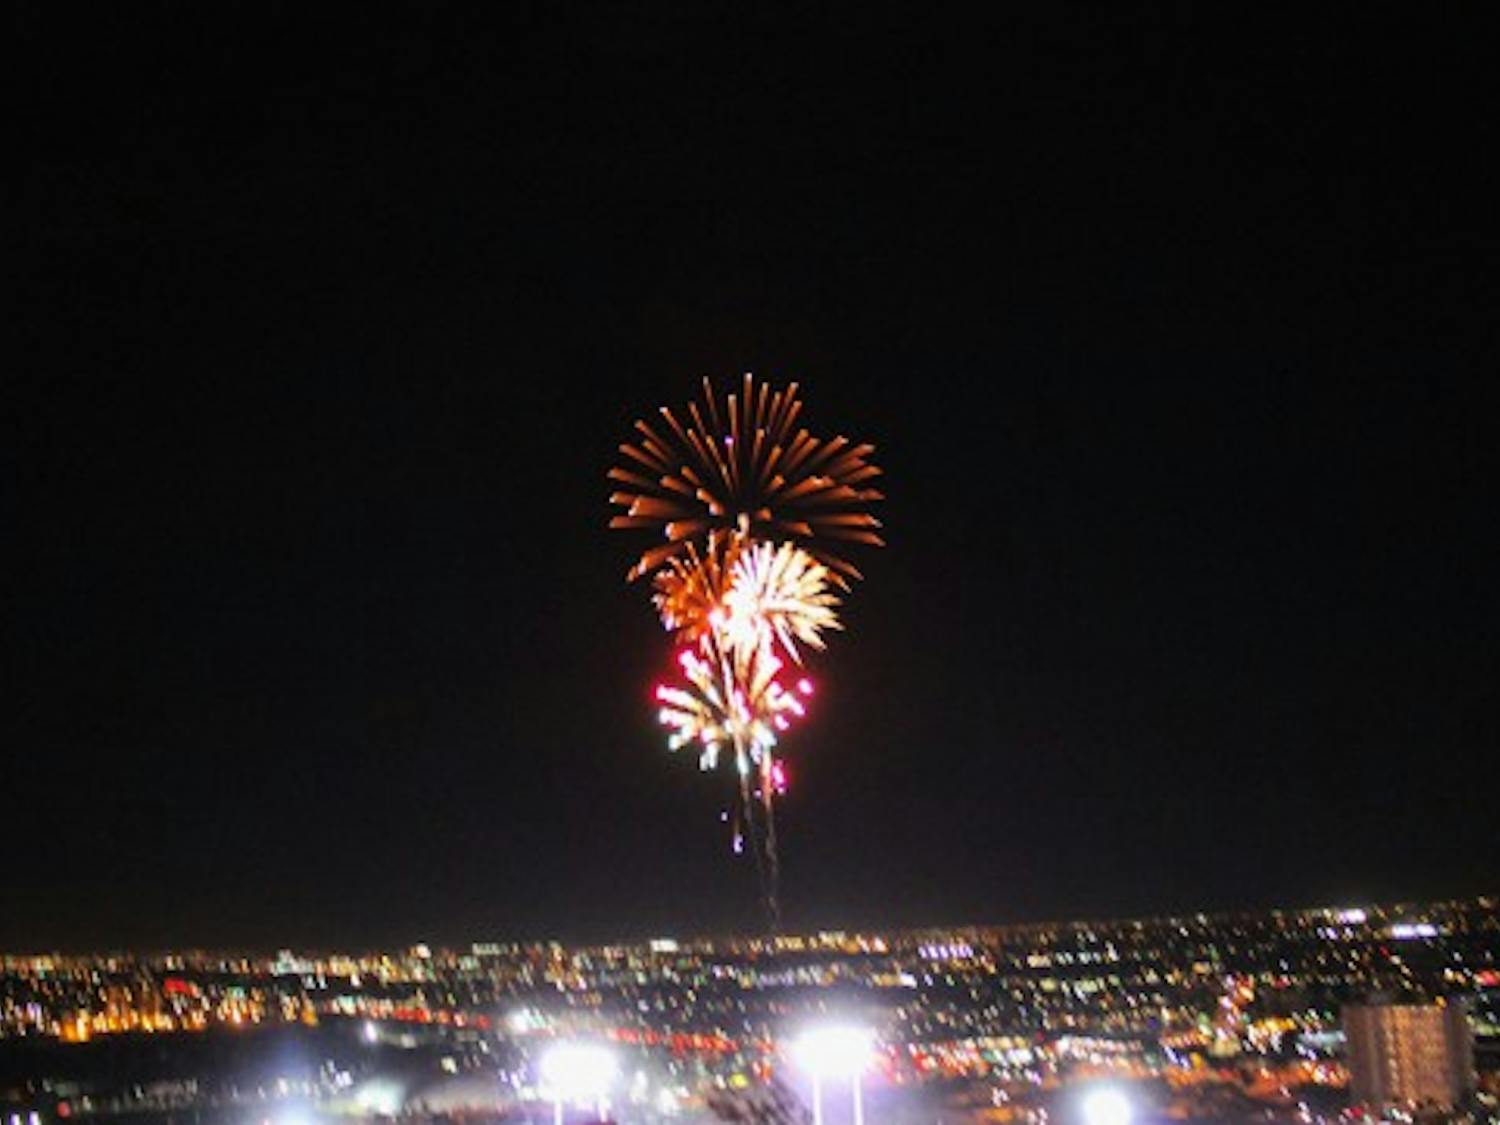 Fireworks shoot into the air above Sun Devil Stadium, after ASU's last touchdown during the ASU vs. Oregon game Thursday night.  (Photo by Jenn Allen)
